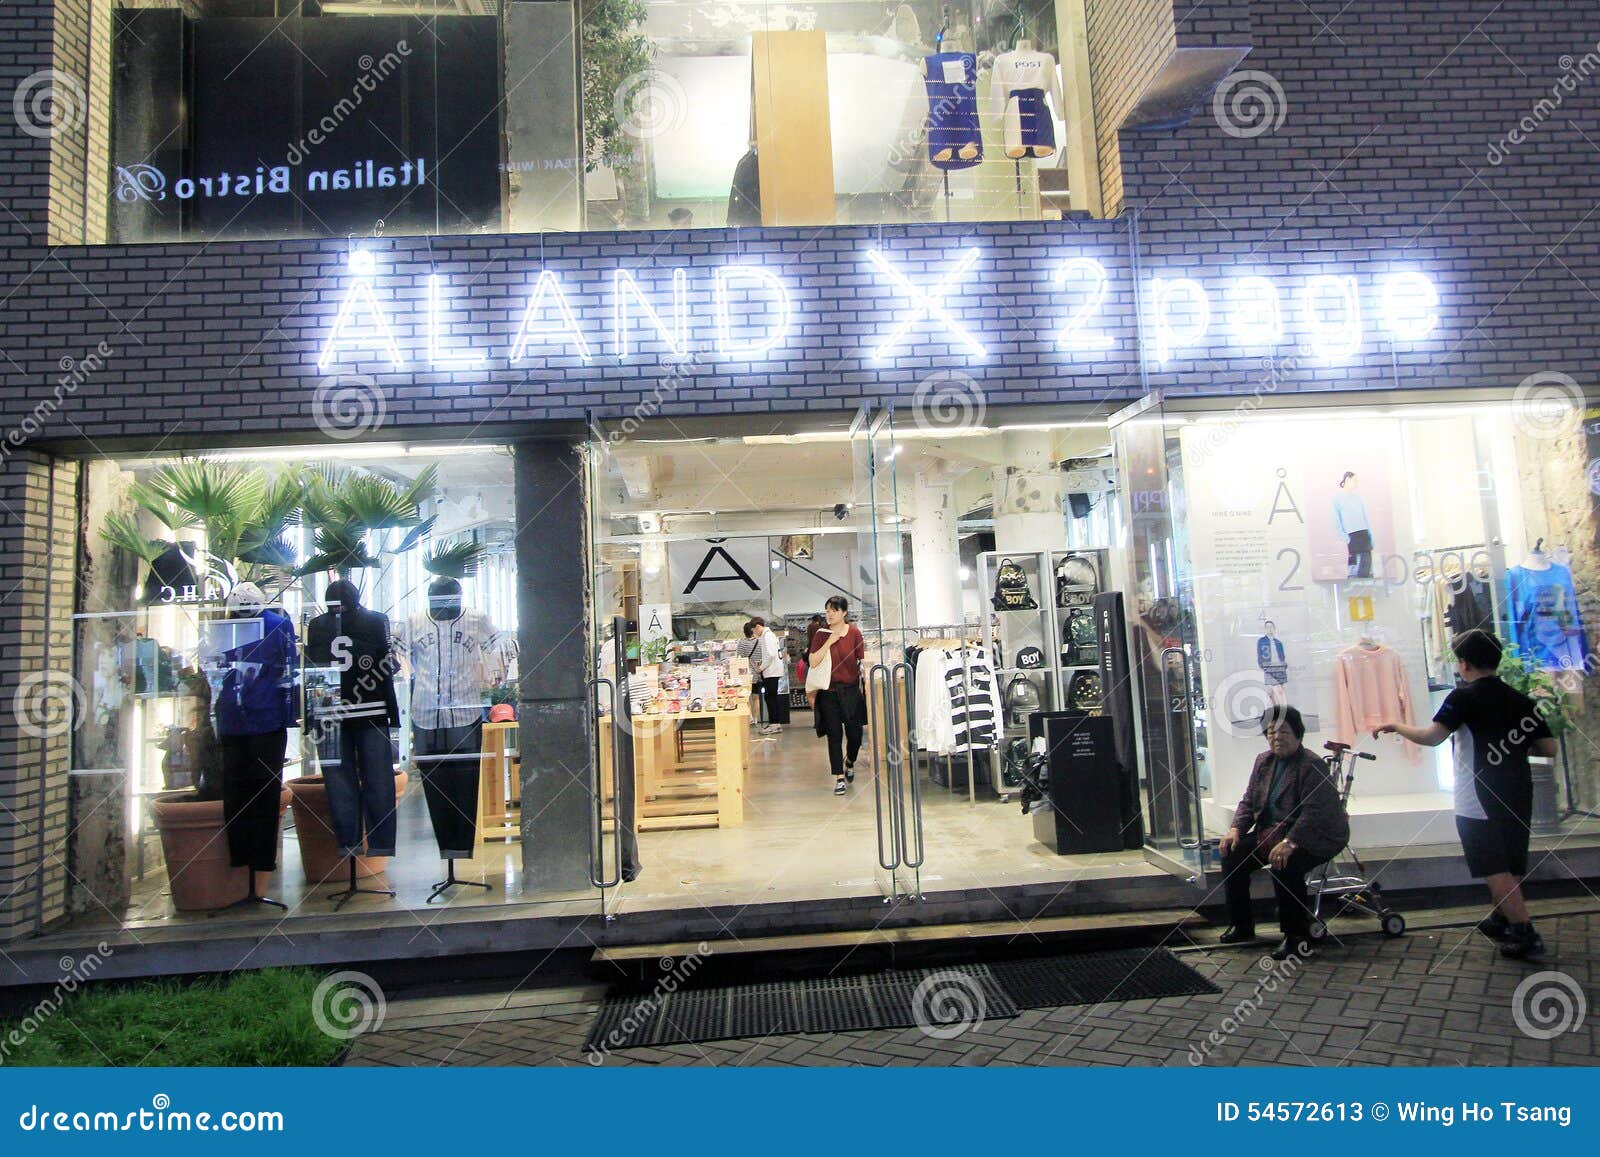 Aland X 2page Shop In Seoul Editorial Stock Photo Image Of Kings Club